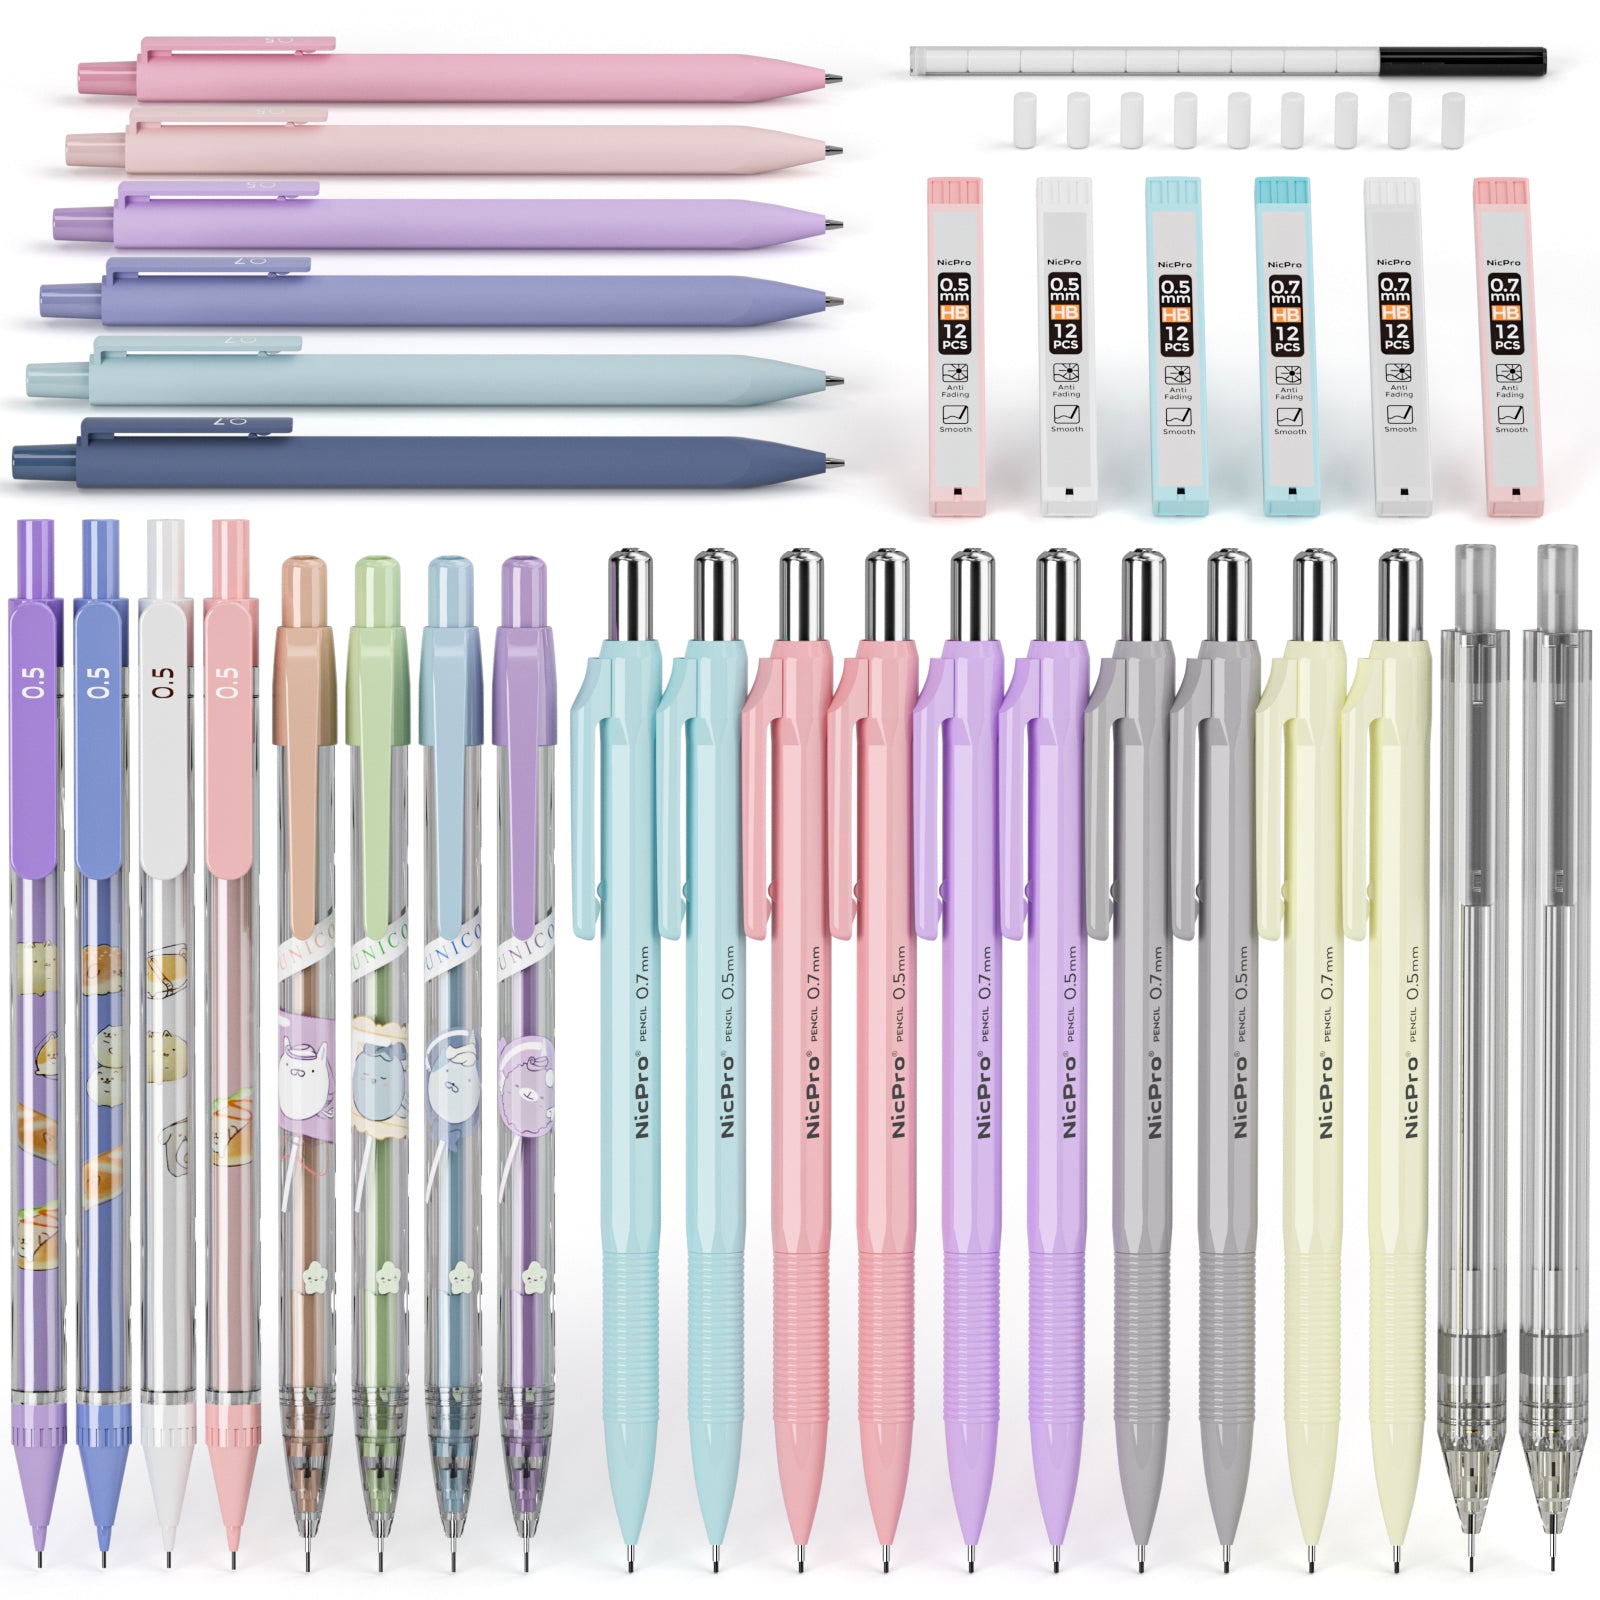 Nicpro Pastel Art Mechanical Pencil Bulk Set, 26 PCS Cute Drawing Pencils 0.5 & 0.7 mm With 6 Tubes HB Lead Refills and Eraser Refills For School, Office Supplies Writing Sketching Drafting